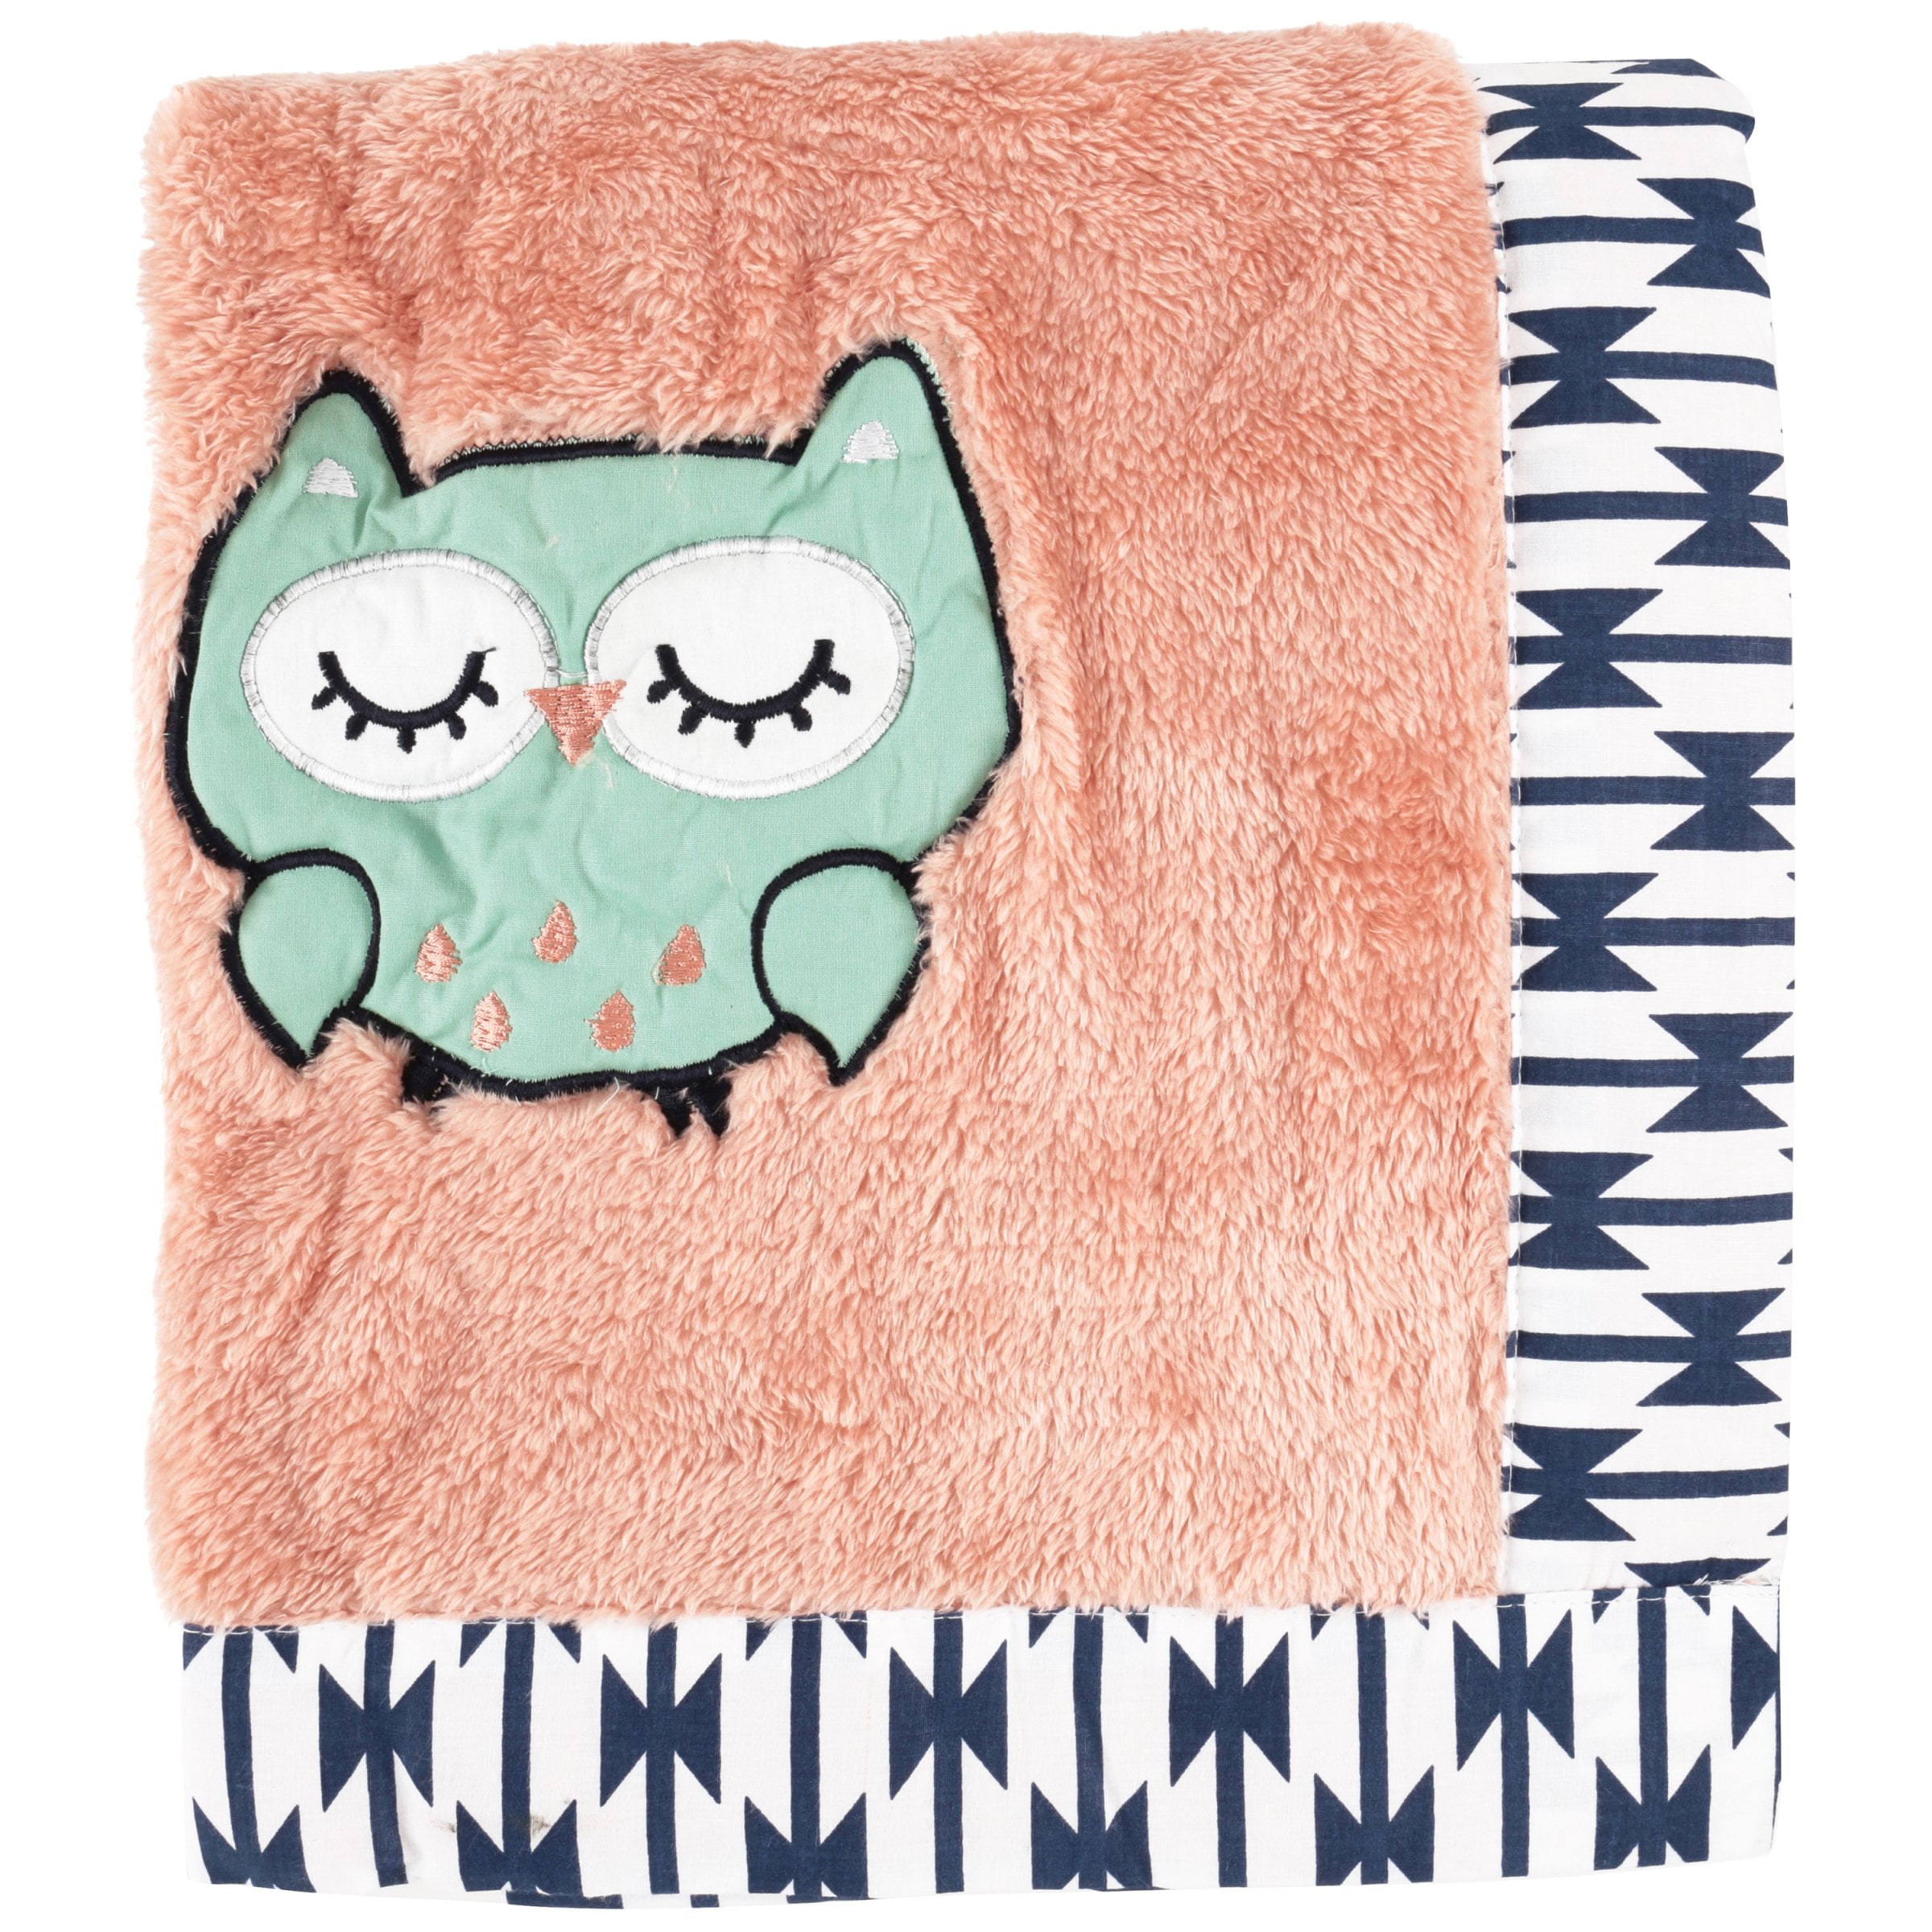 Tribal/Aztec Plush Embroidered 30 x 40 inches Baby Blanket AZCNABLK2 Bacati Coral/Navy Owl 